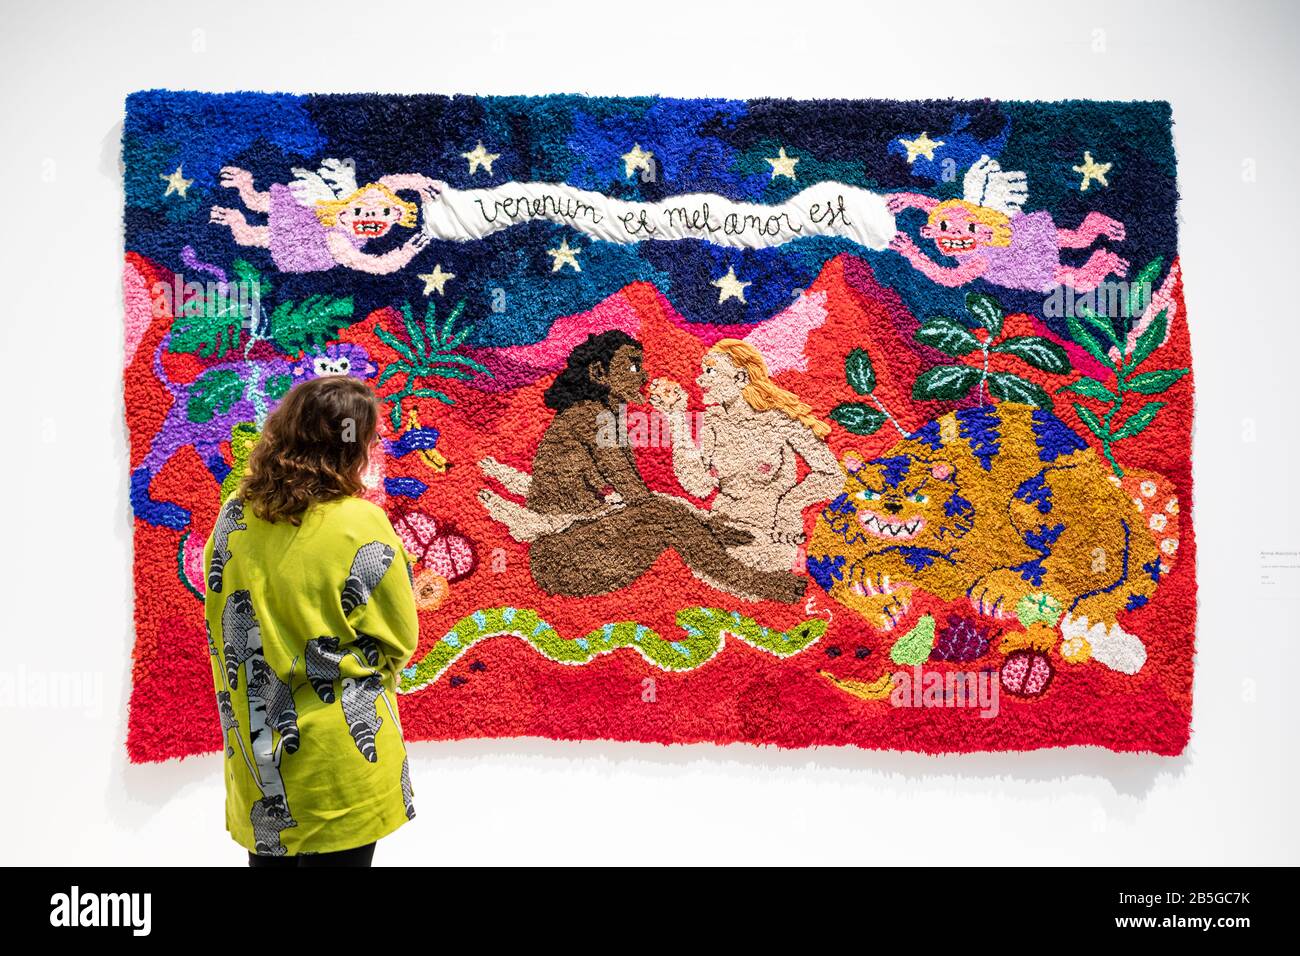 Brown-haired woman looking at 'Love is both Honey and Venom', rug artwork by Anna-Karoliina Vainio, at Amos Rex art museum in Helsinki, Finland Stock Photo